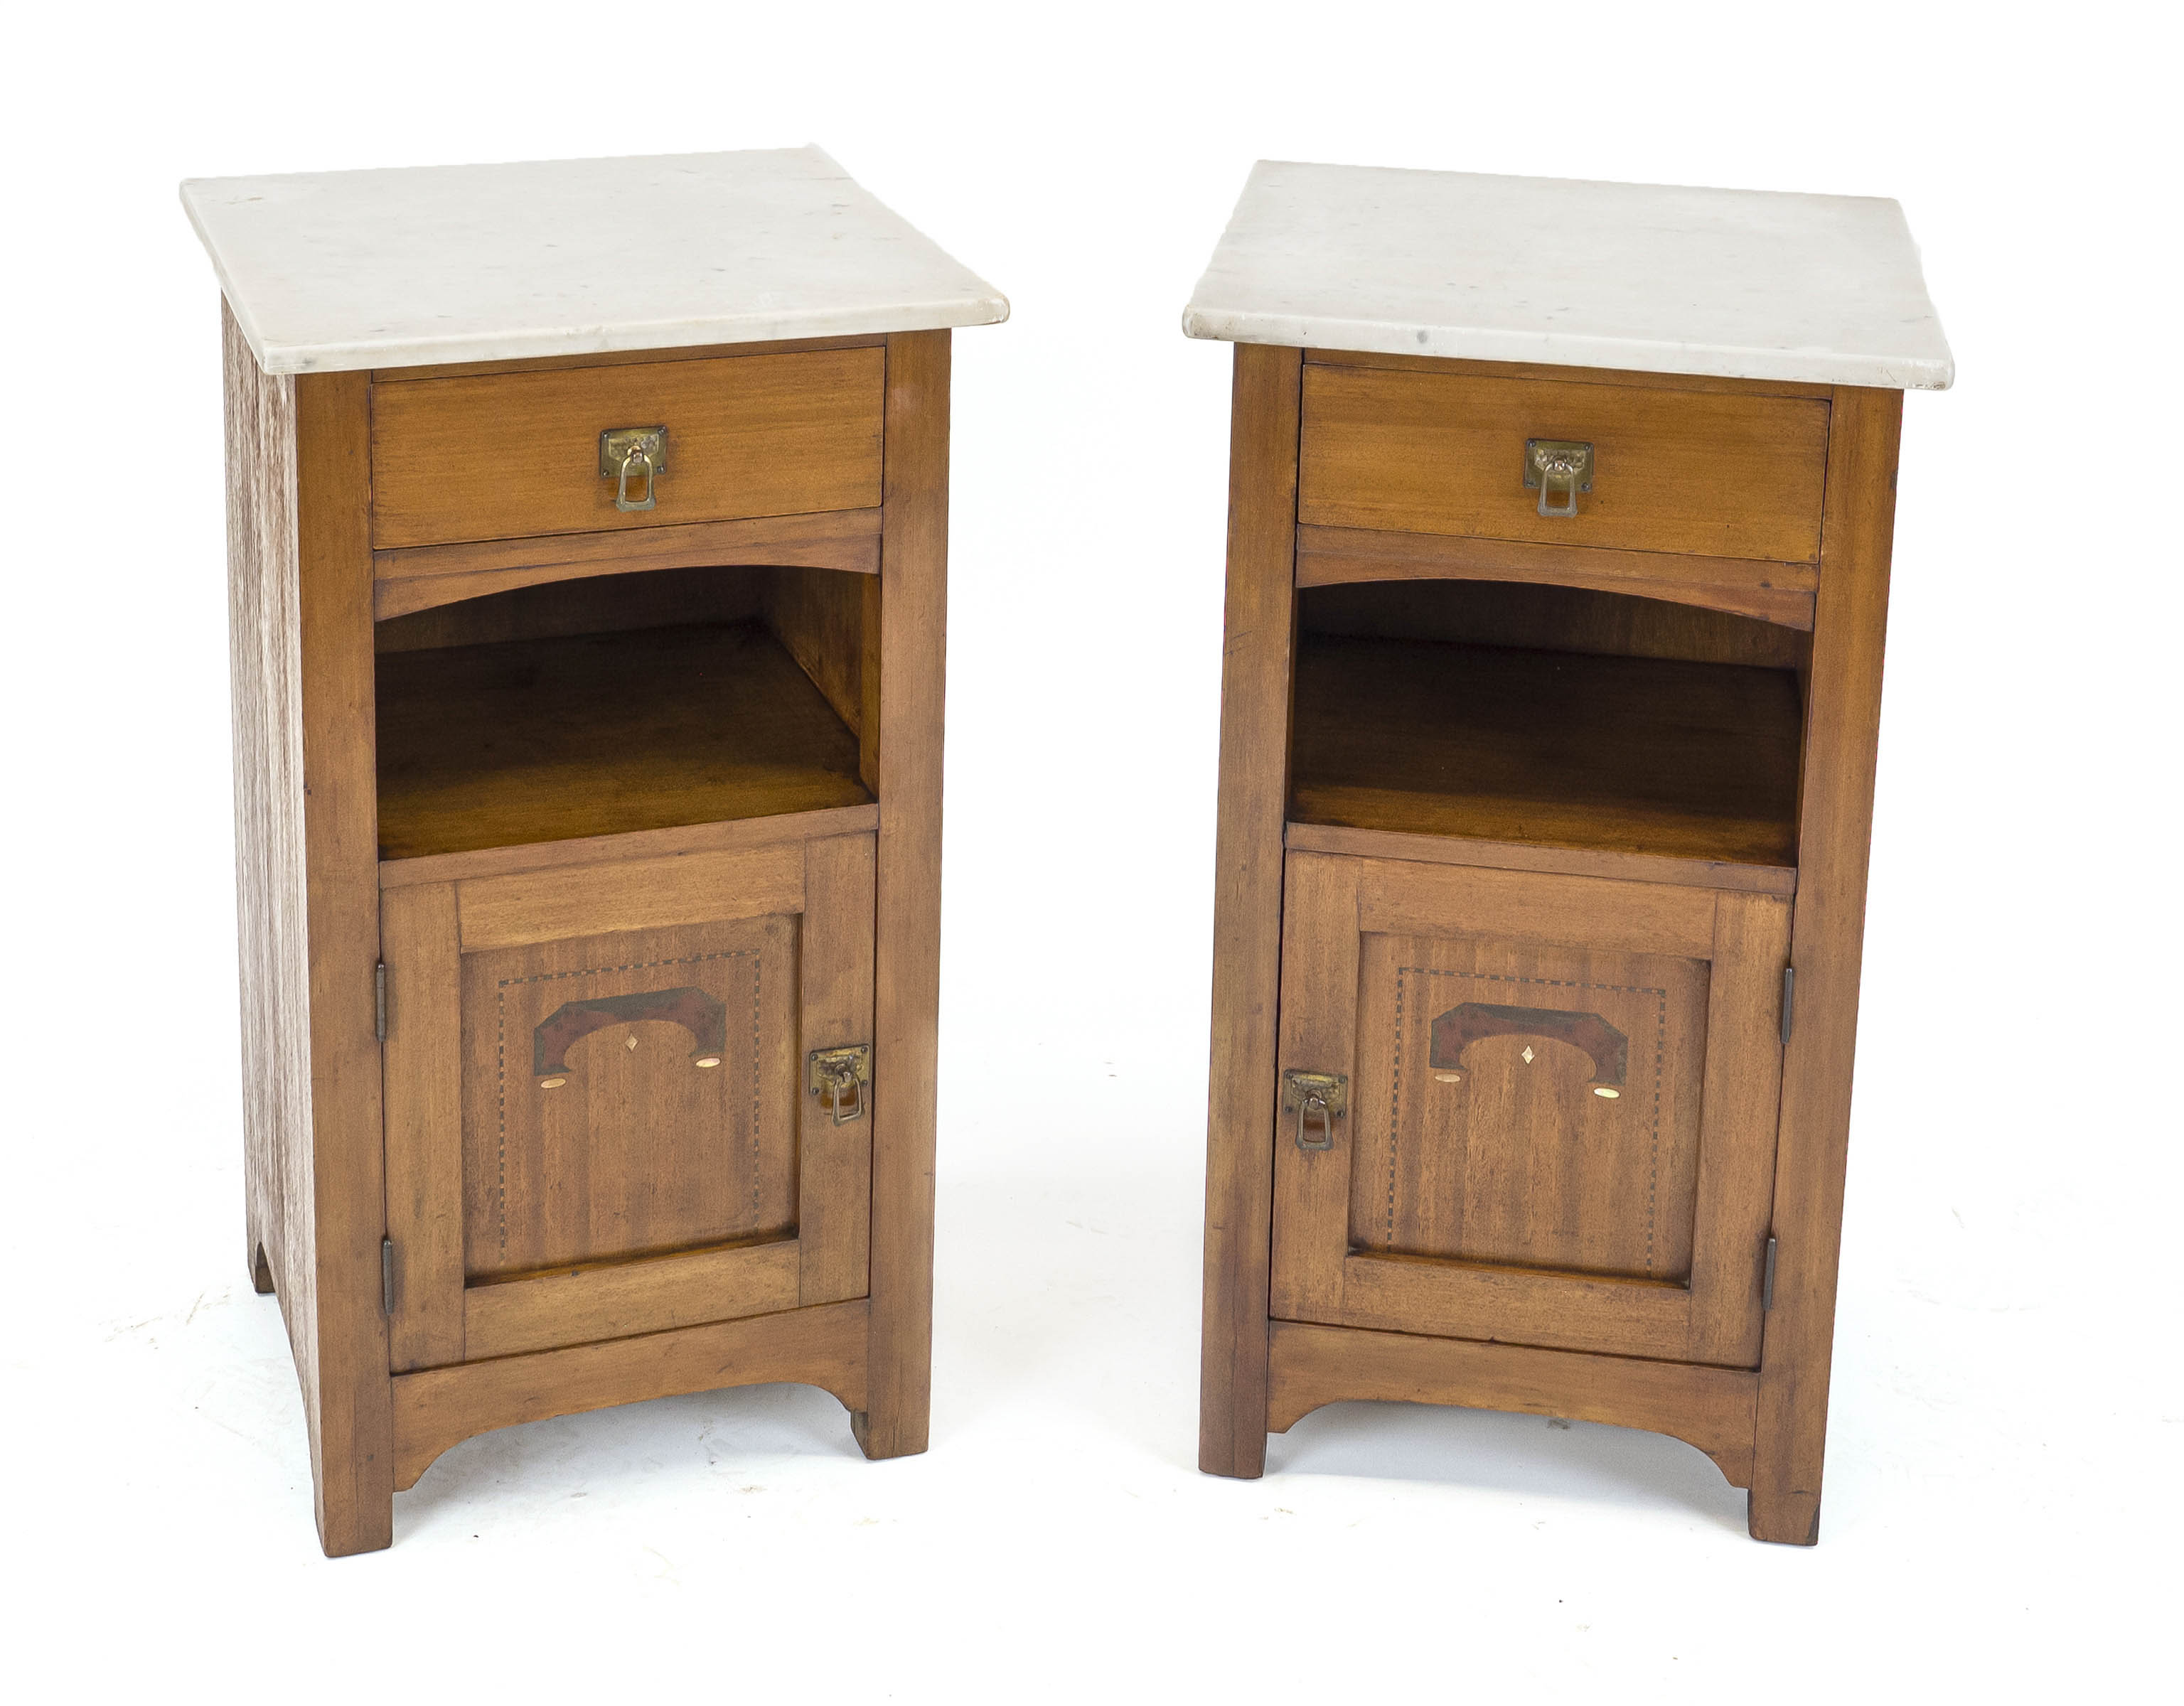 Pair of Art Nouveau bedside/side cabinets, c. 1910, mahogany, inlaid lower door, white marble top,